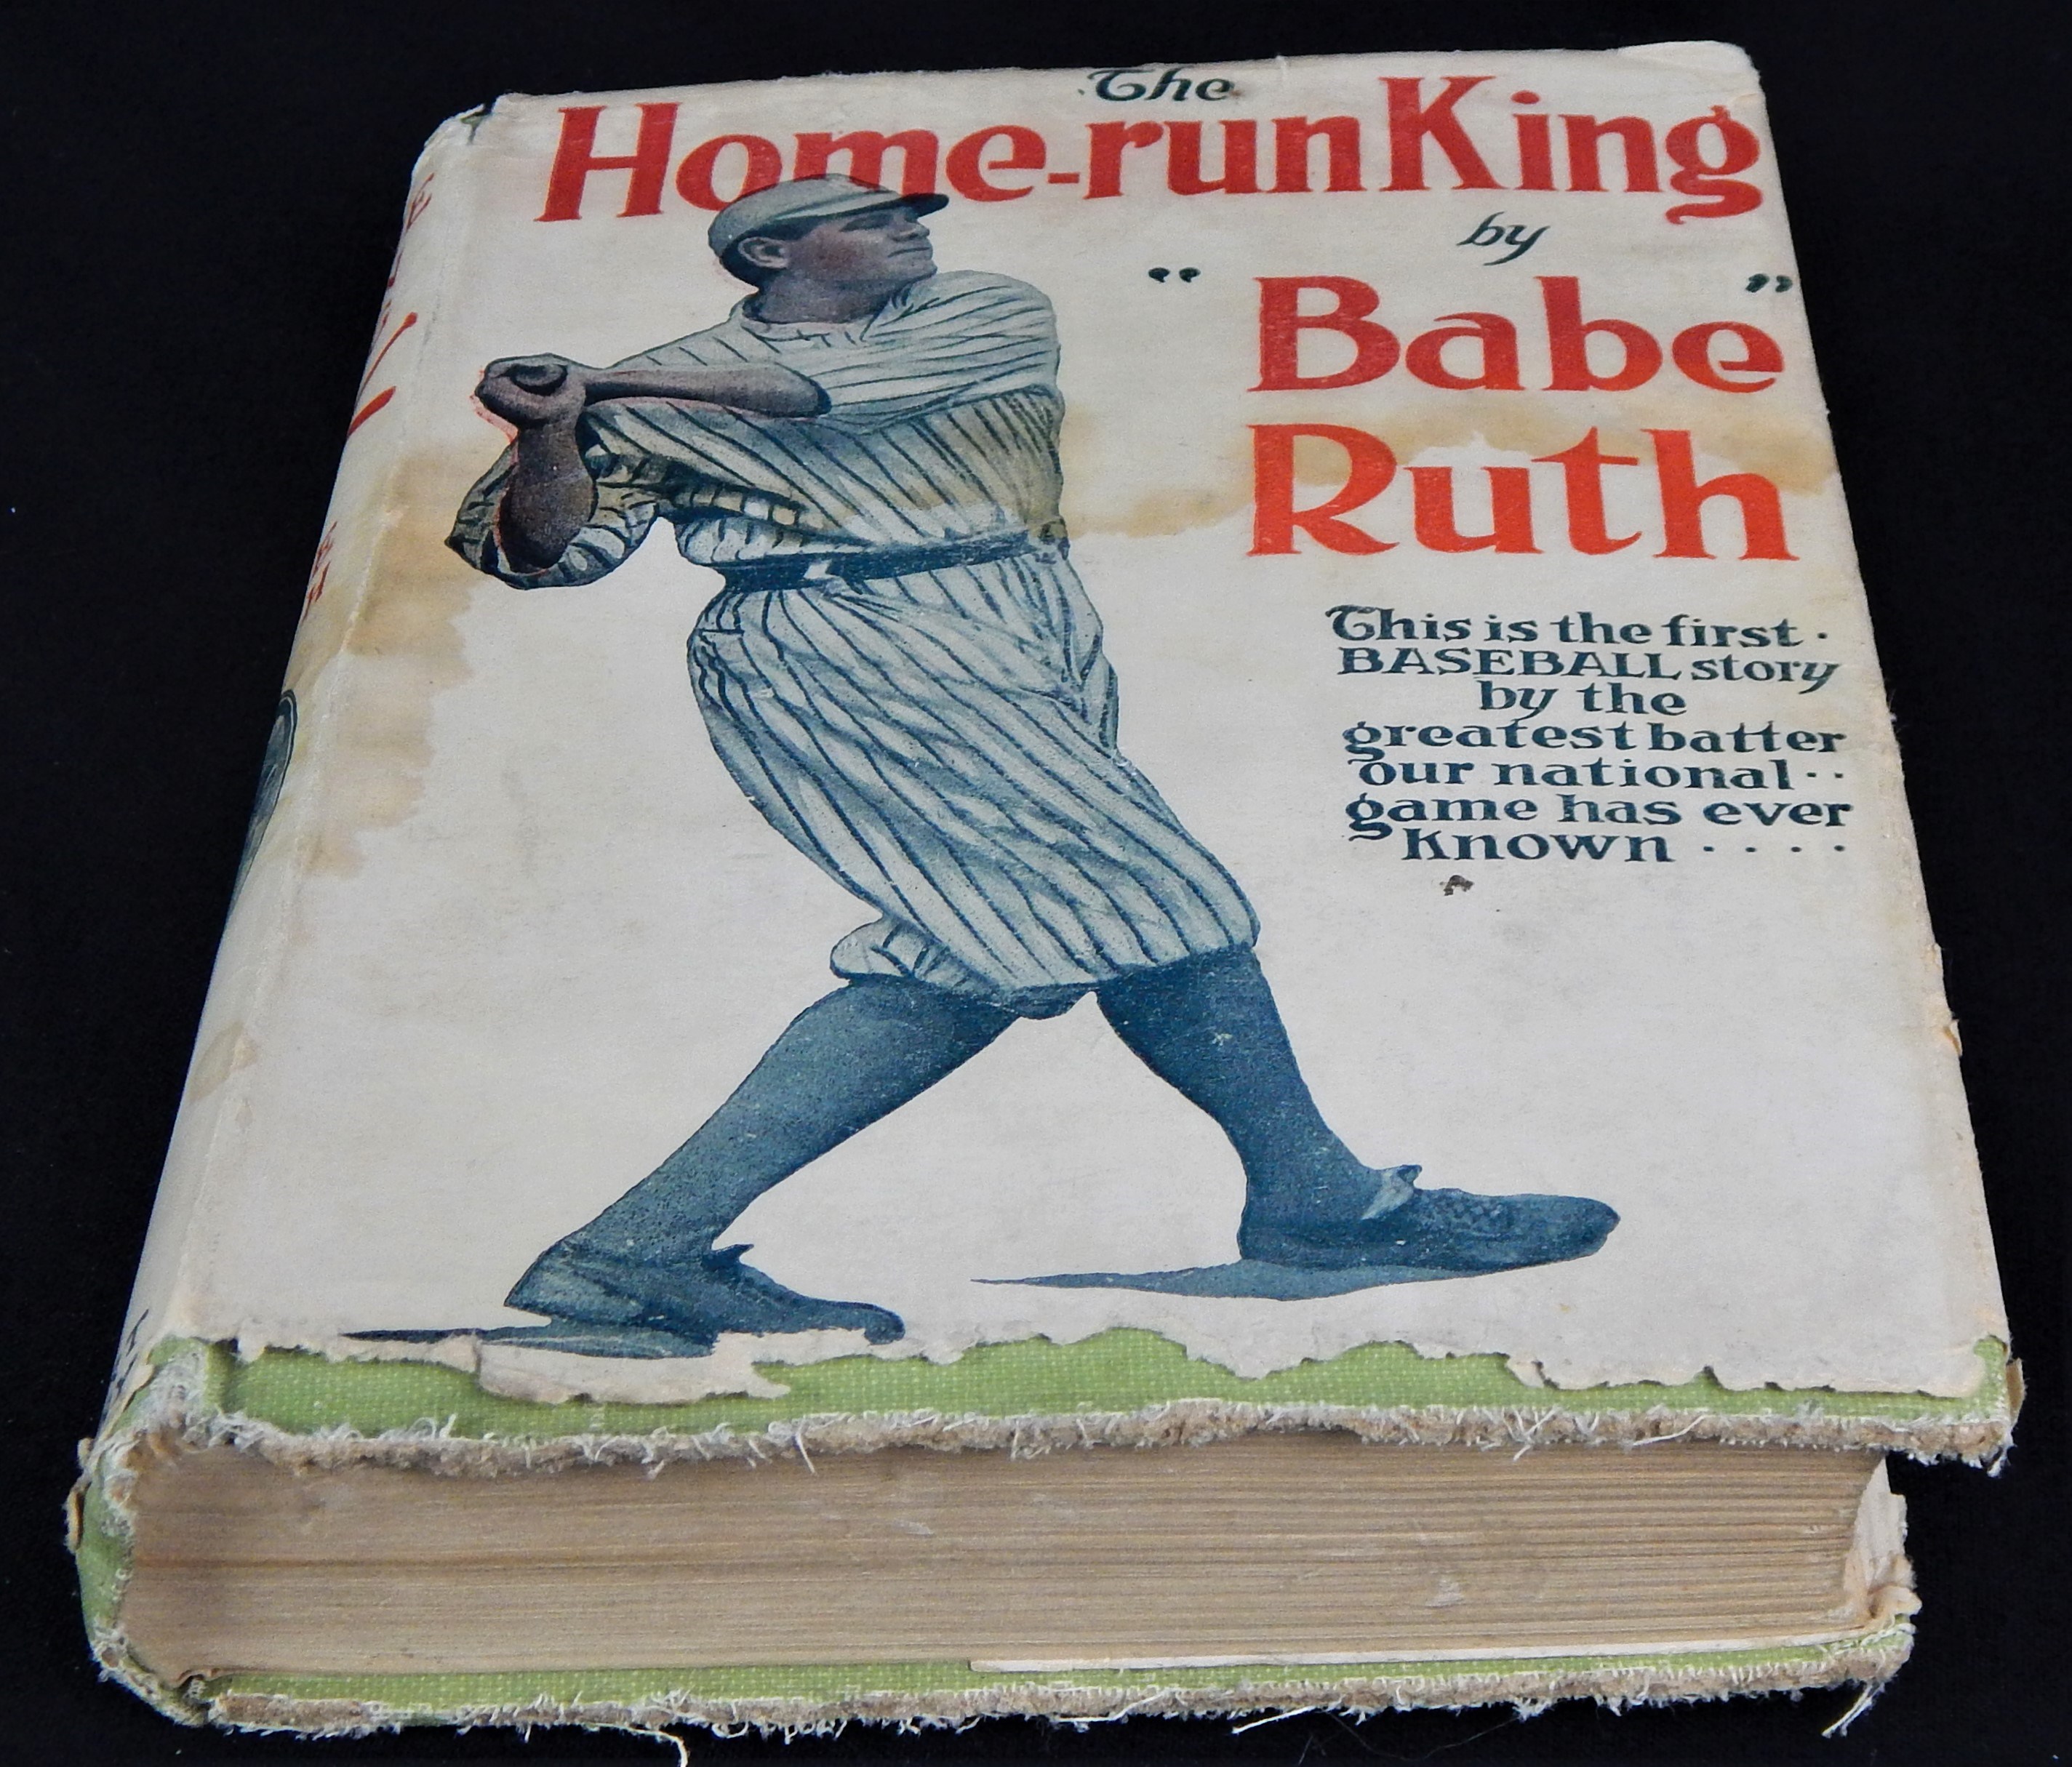 1920 The Home Run King by Babe Ruth with Original Dust Jacket